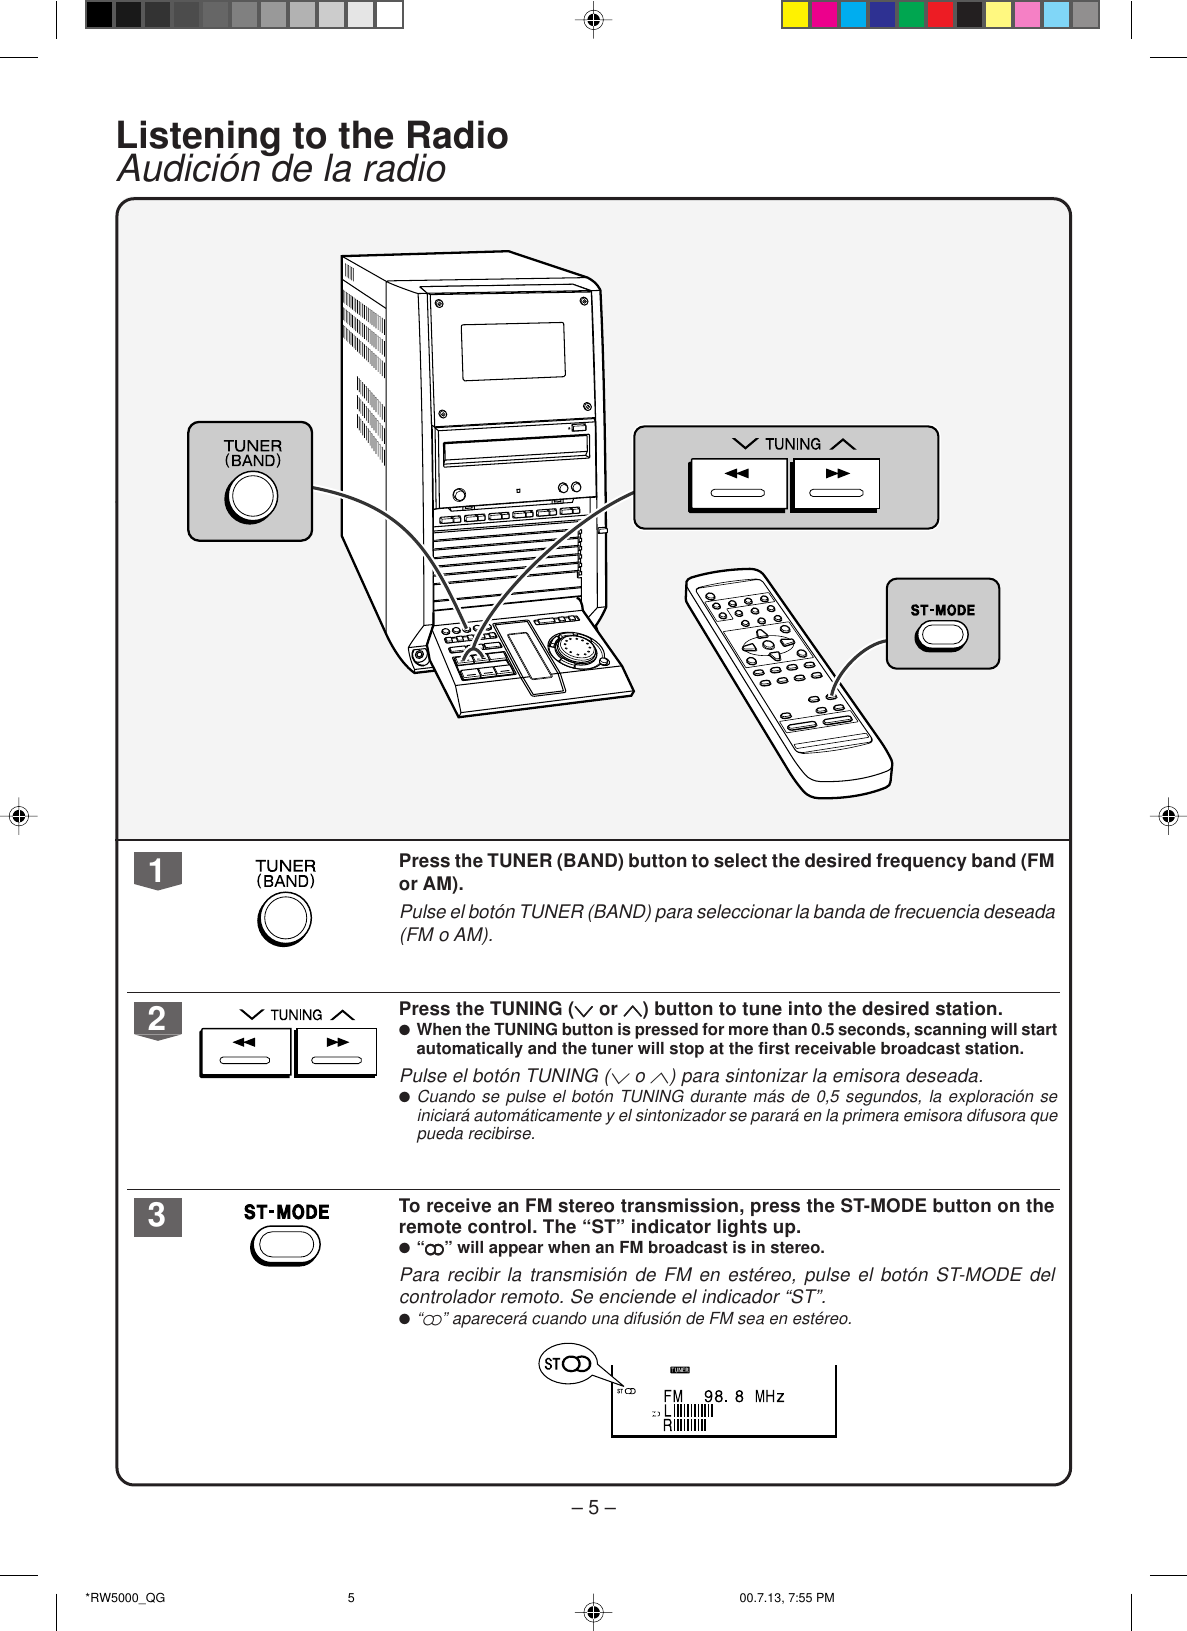 Page 5 of 8 - Sharp Cdrw5000-Quick-Guide CD-RW5000 Quick Start Guide